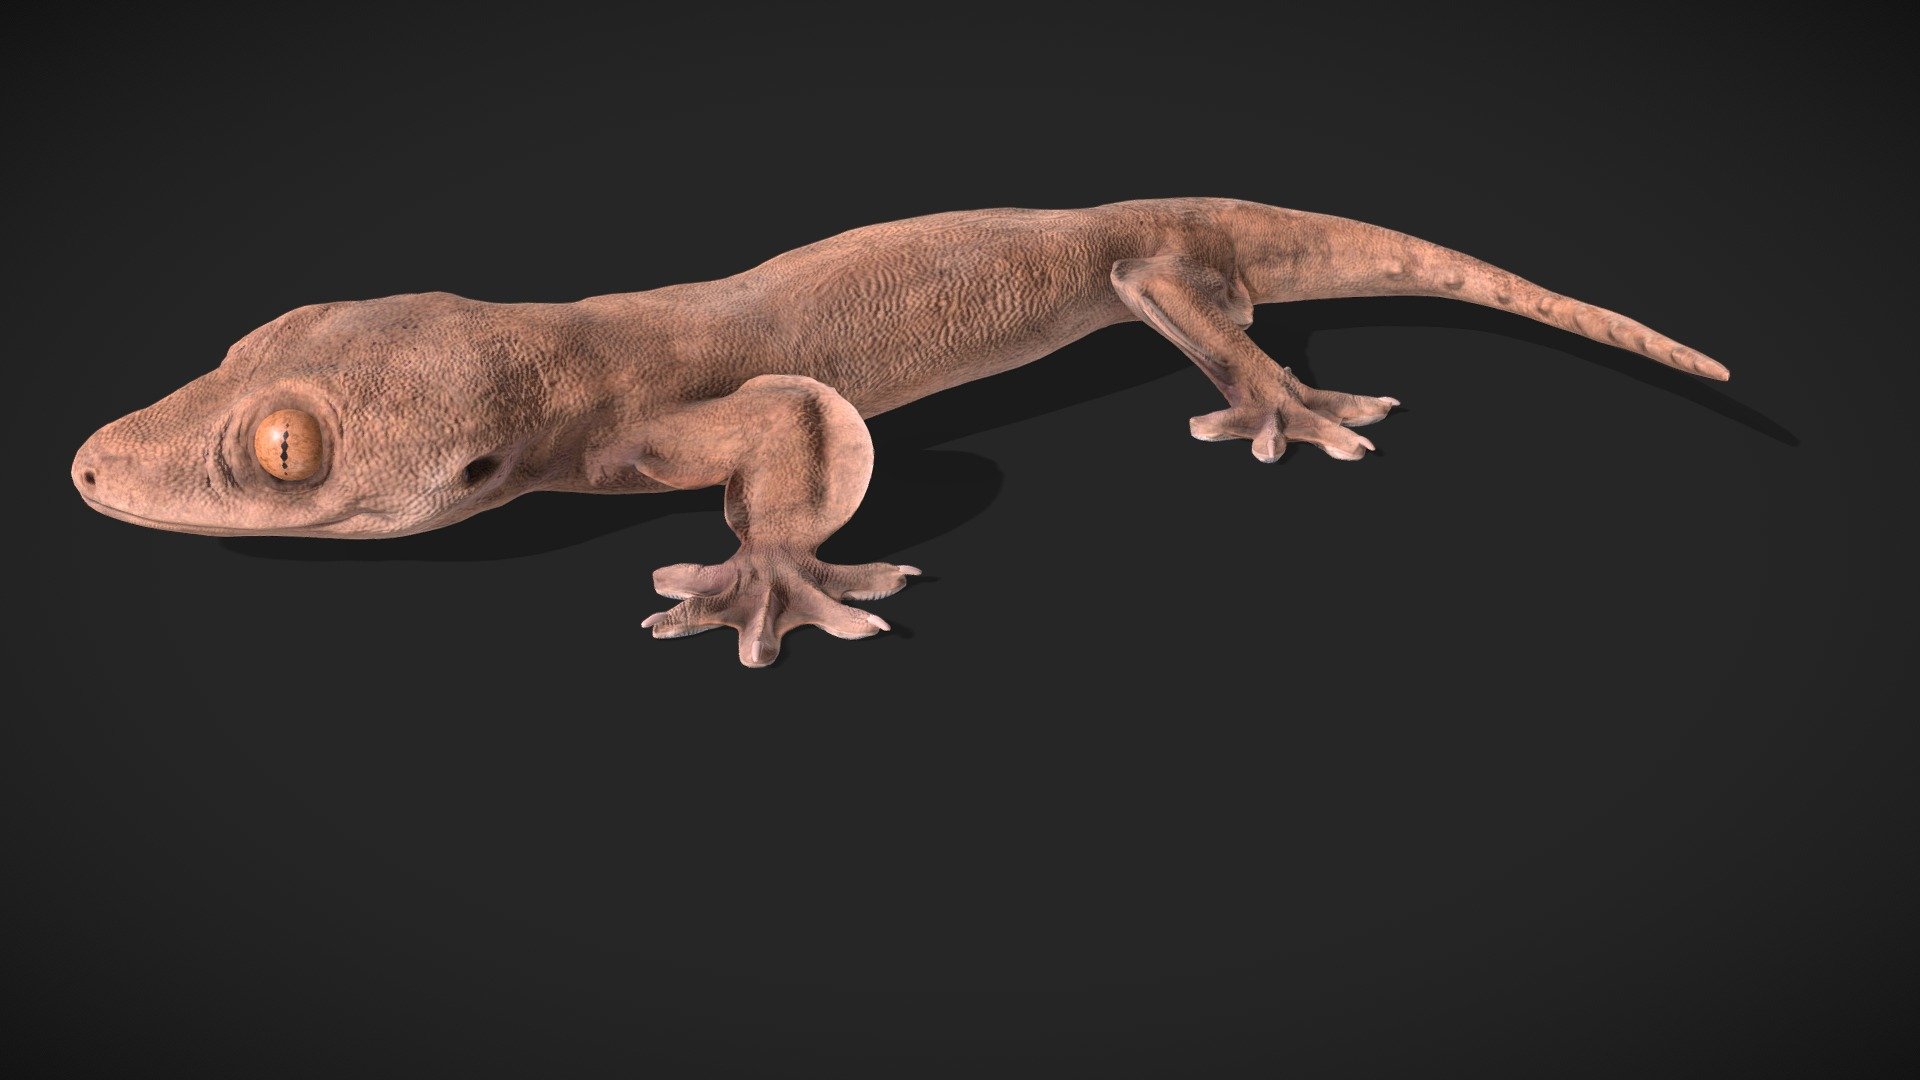 This is a 3D animation of the gecko Lupersaurus macgregori.  This 3D mesh was created by integratring a CT-scan of a preserved adult male specimen with images and video from other live individuals.  The creation of this model was done in collaboration with Matt Heinicke, Tony Gamble and Cameron Siler.  Creation of this model was supported by NSF grant NSF DEB-1657527).  CG artist Johnson Martin created the model.  Juan Daza kindly provided us with the CT-scan.

Downloads are freely available for creative and non-profit use. To inquire about licensing, please visit www.digitallife3d.org 3d model